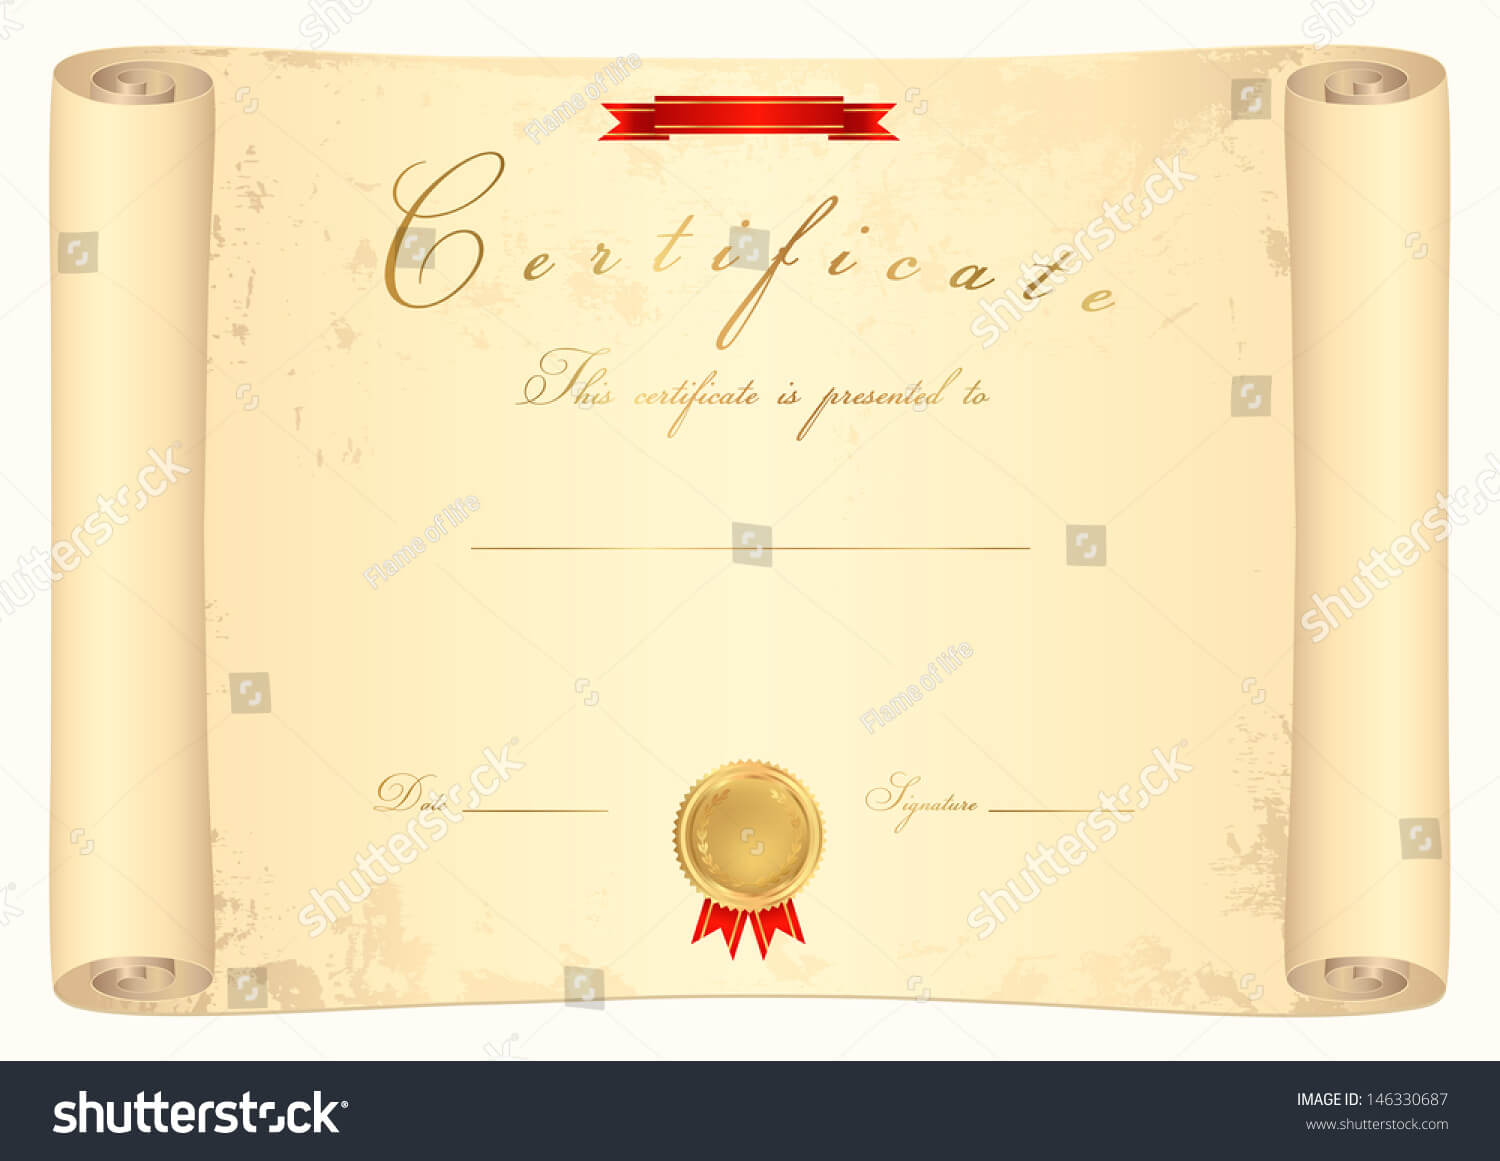 Scroll Certificate Completion Template Sample Background Regarding Scroll Certificate Templates